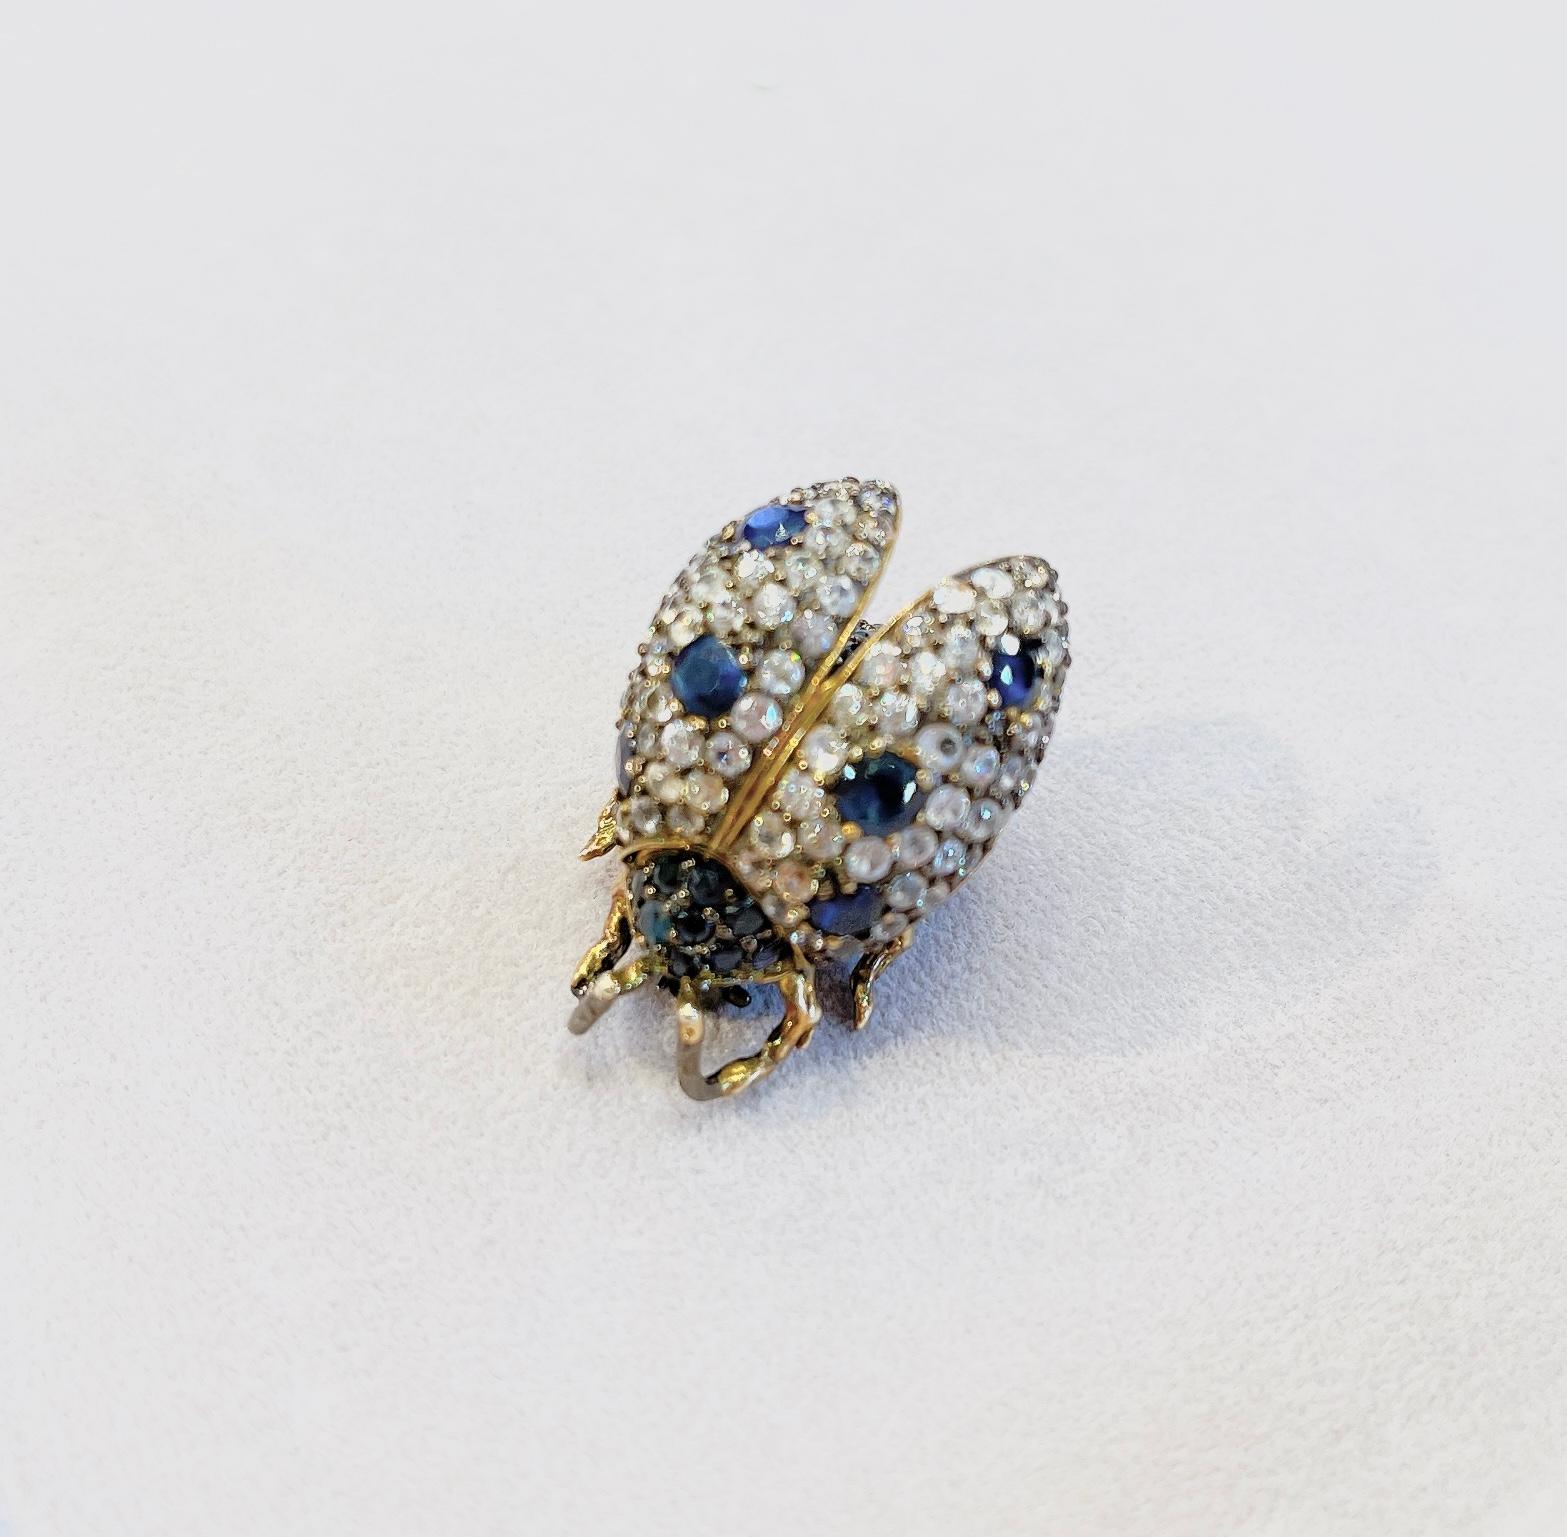 Bochic Multi Color Natural Sapphire and Mix Gem Candy “Beetle” Brooch or Pendent For Sale 3